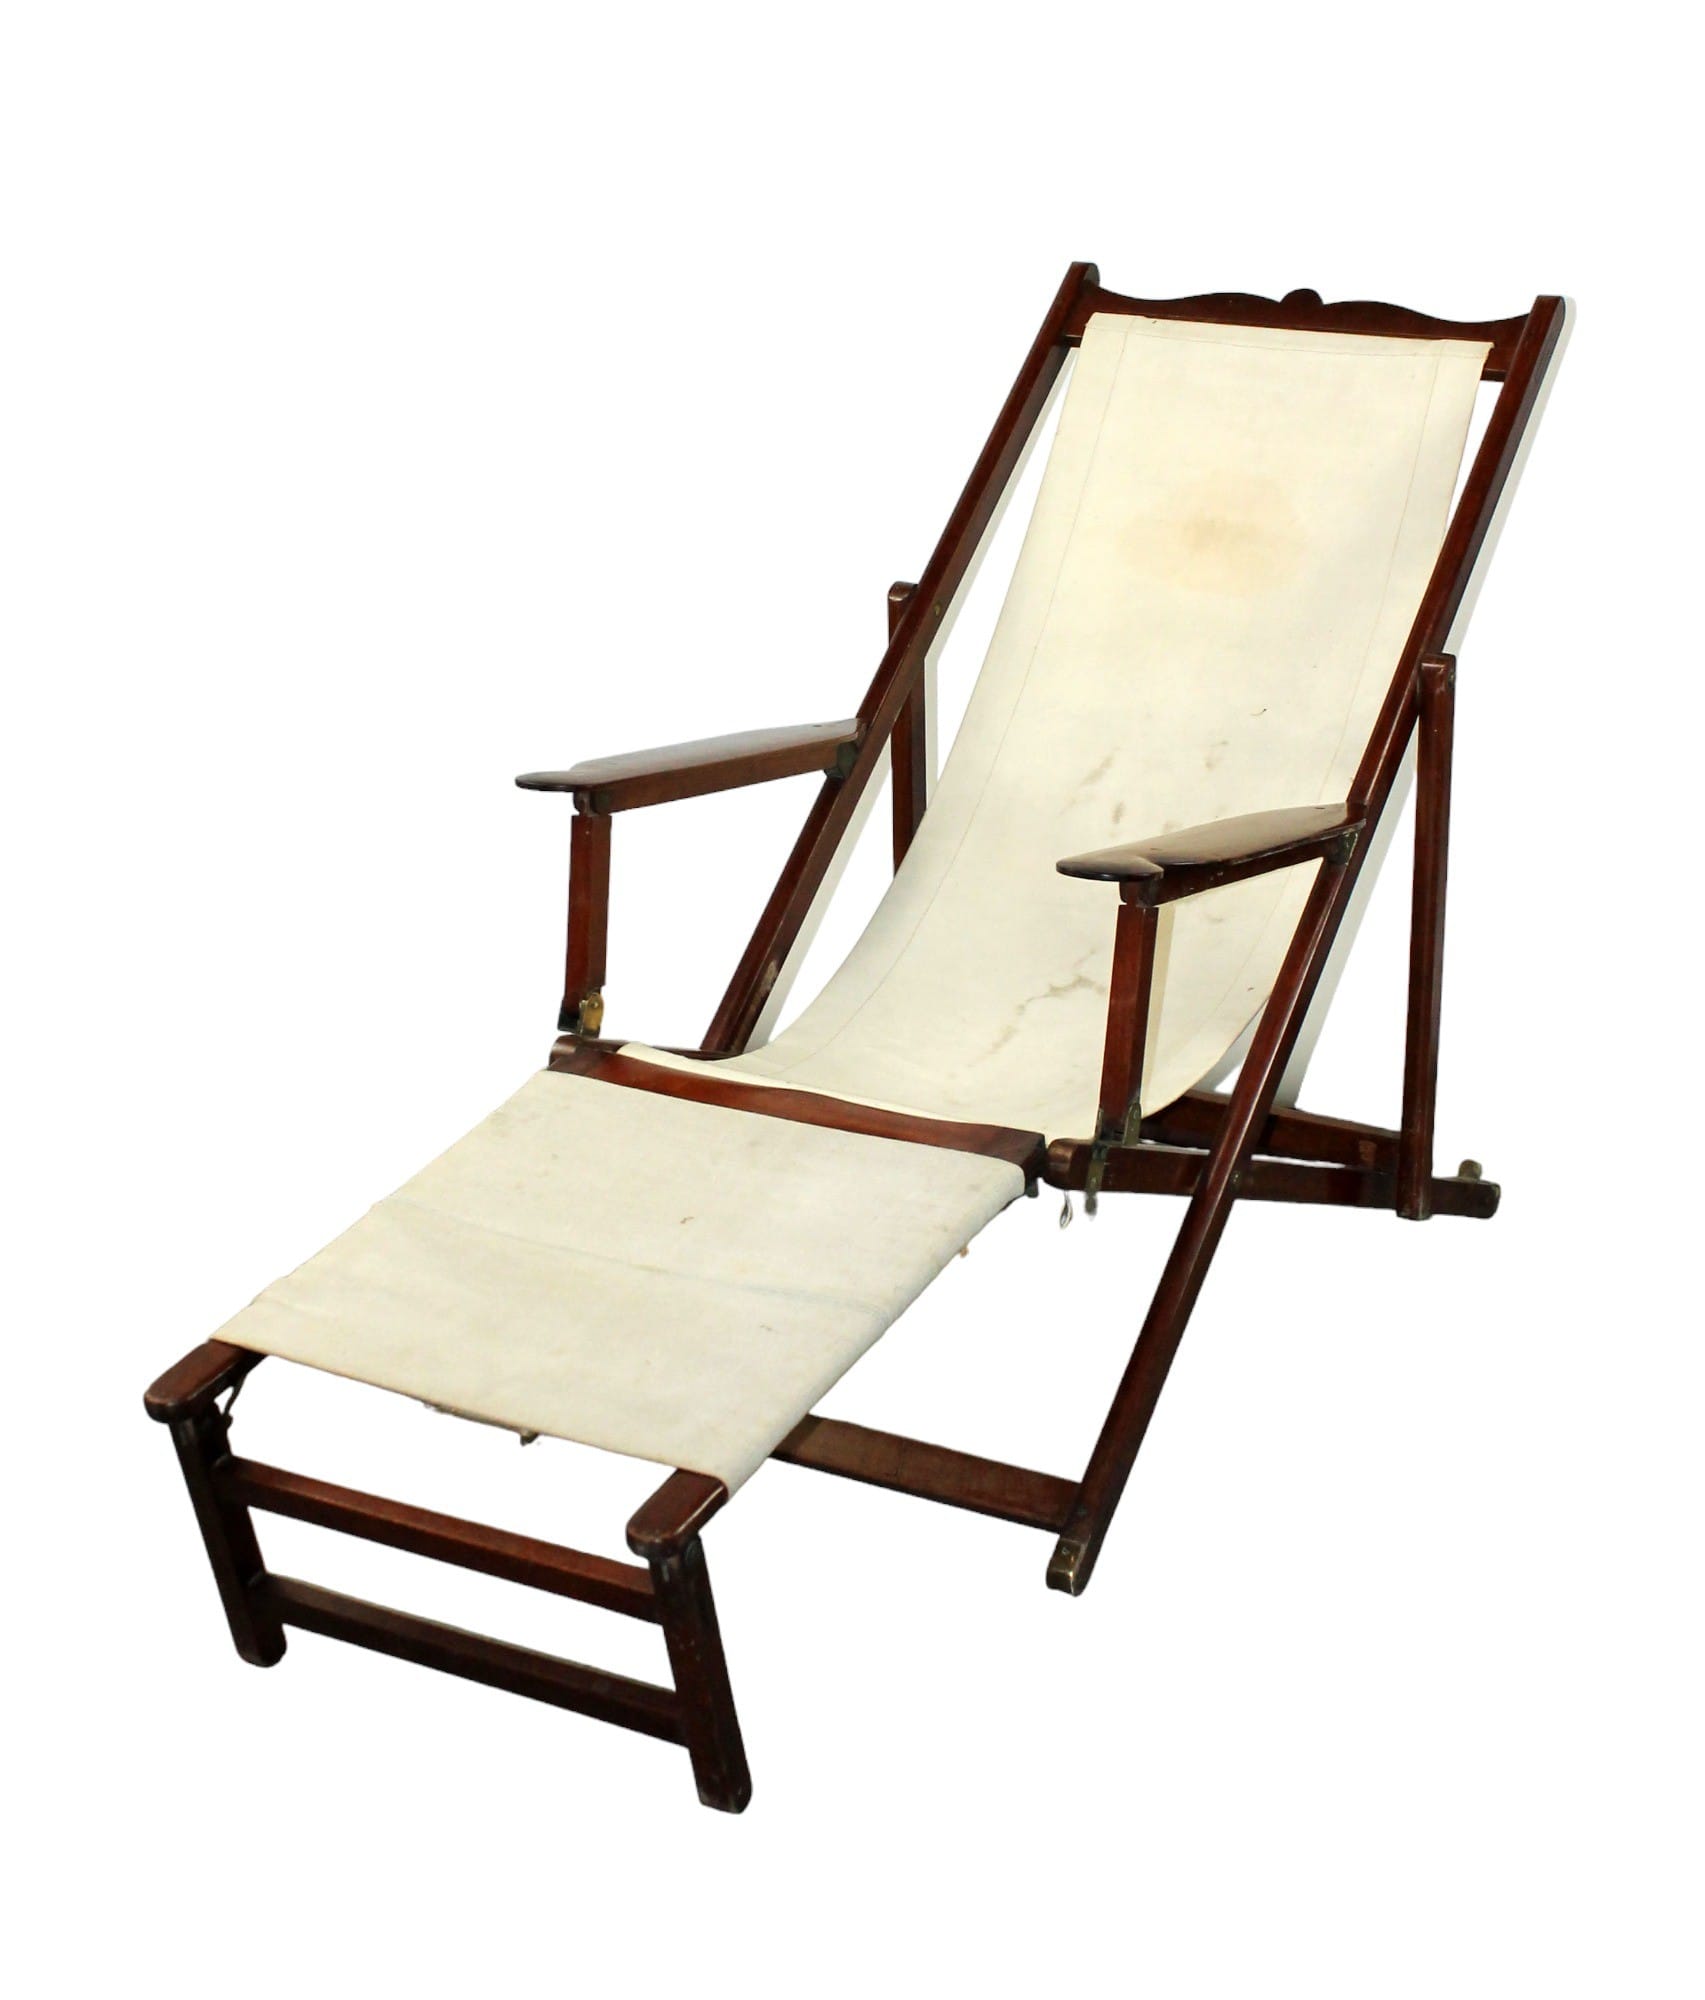 French ship captain's lounge chair